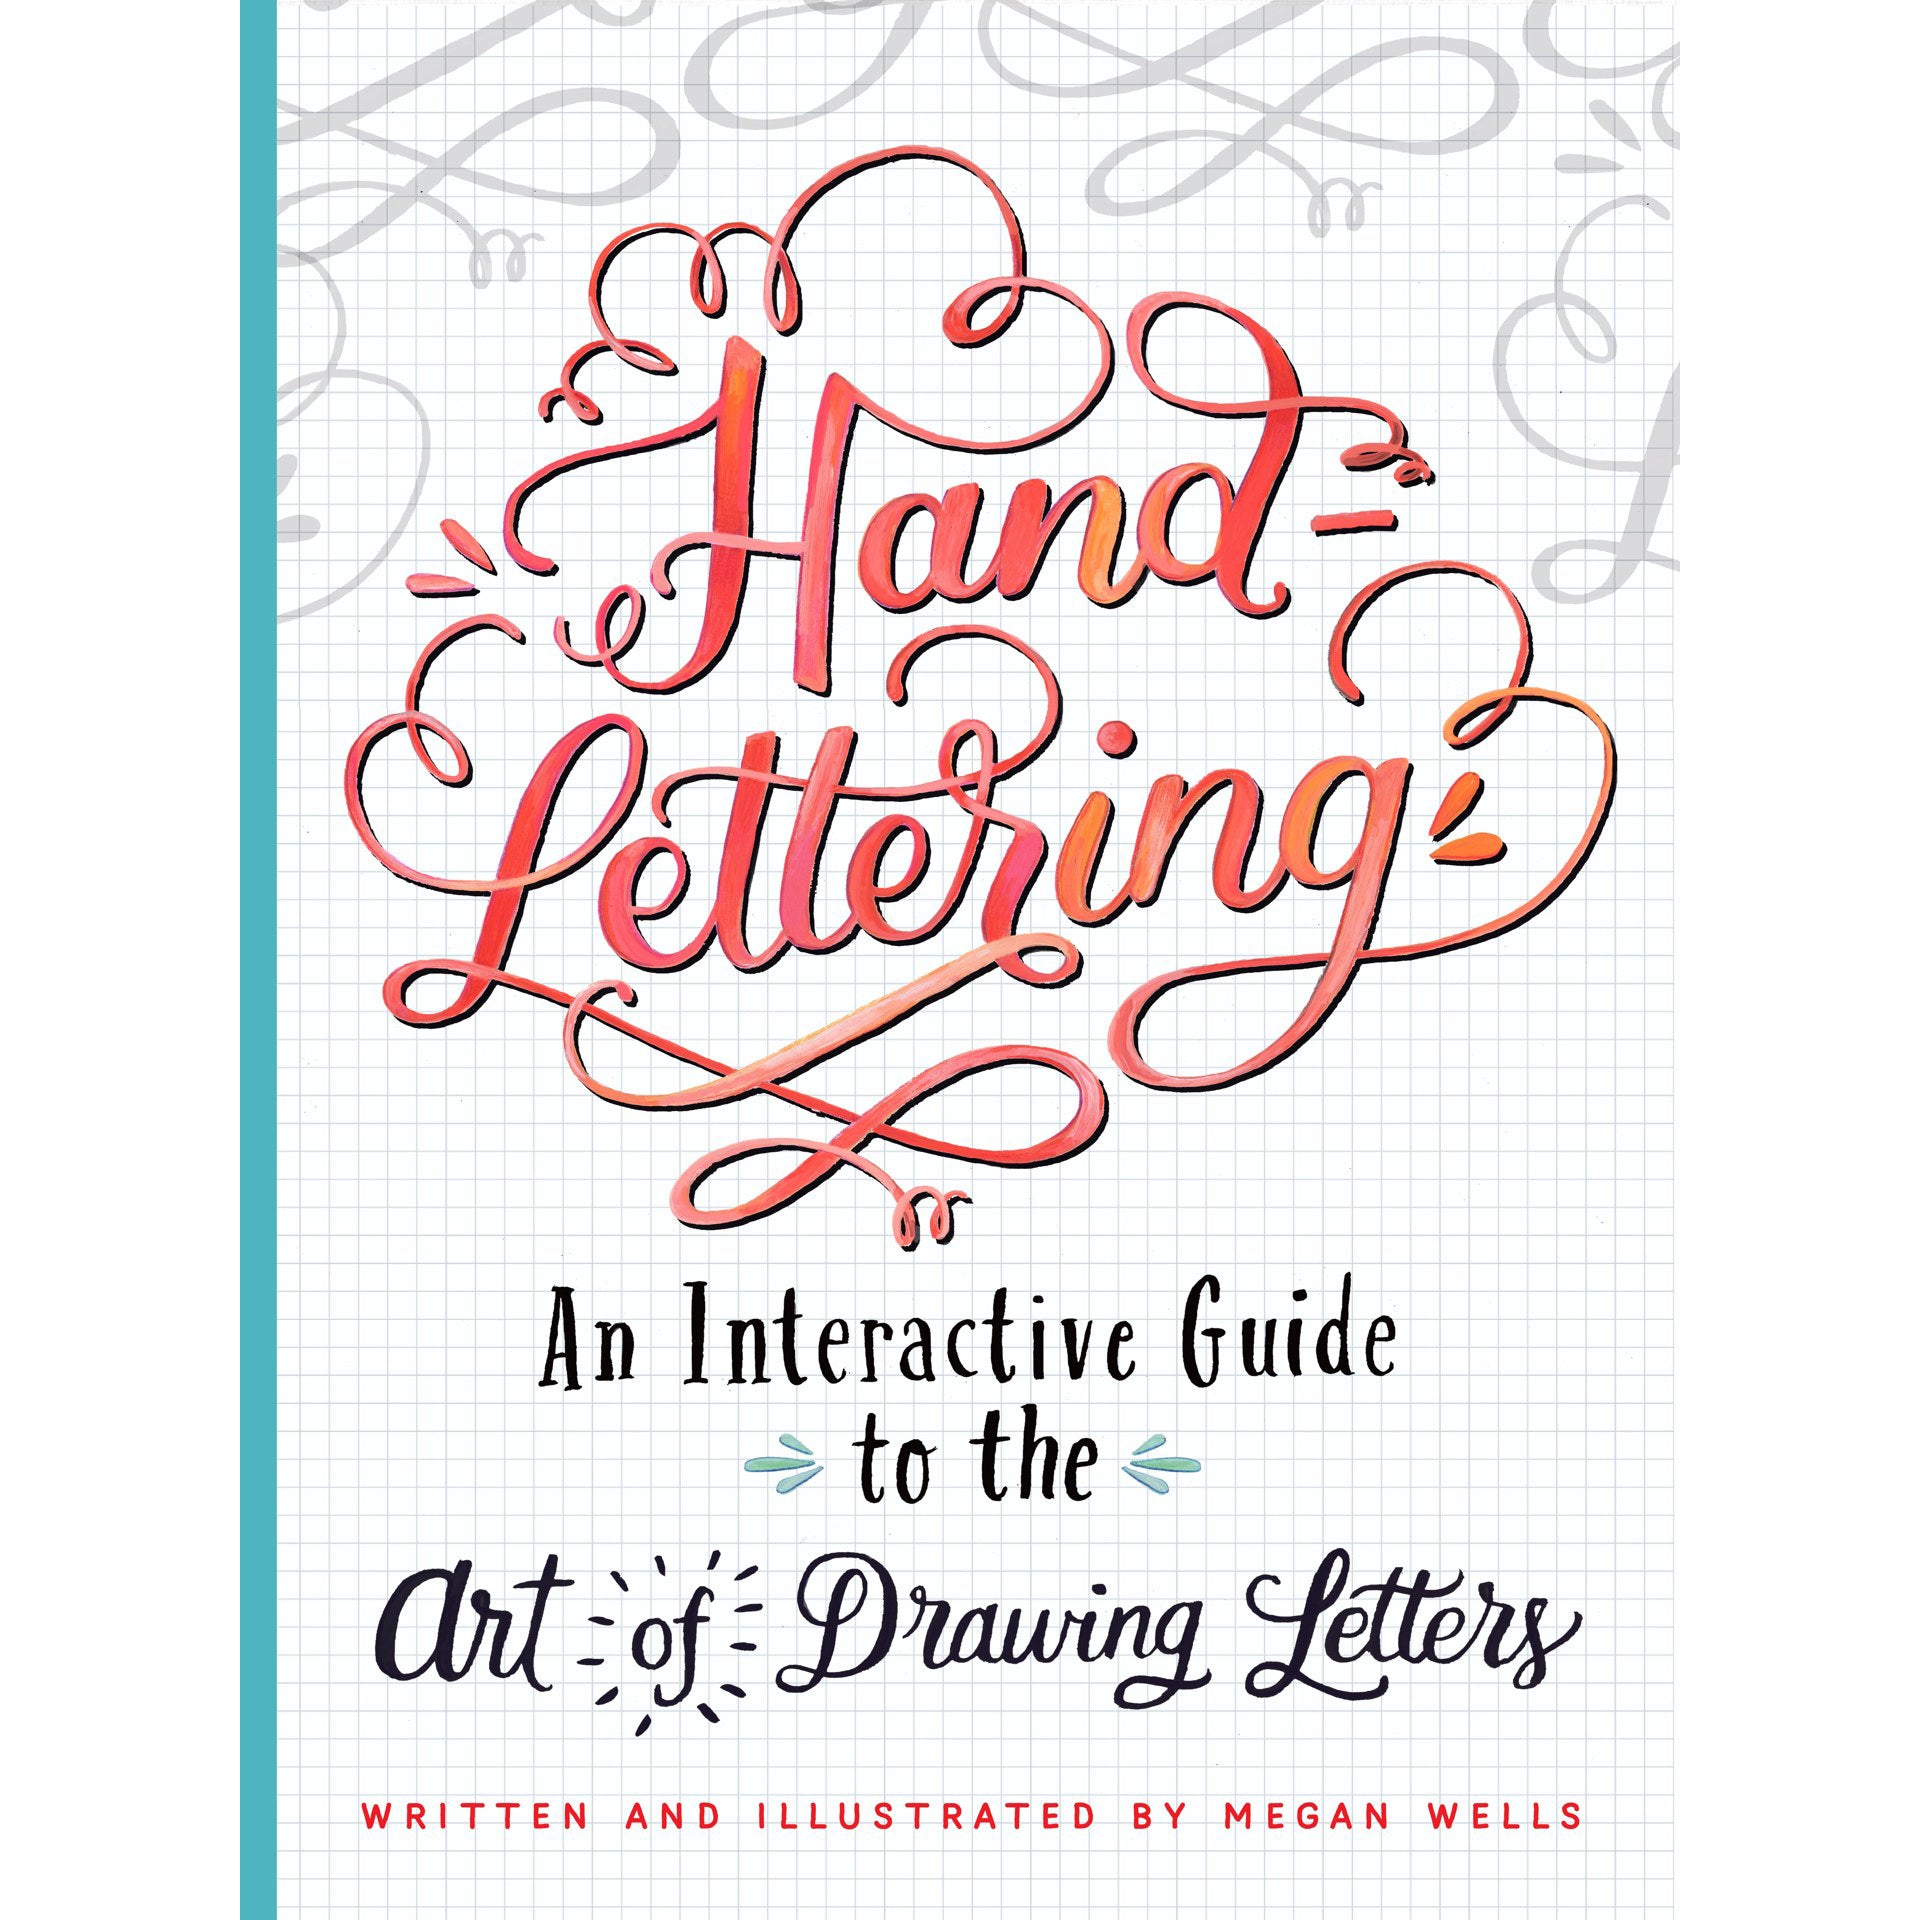 Hand Lettering - an interactive guide to the art of drawing letters - Paper Kooka